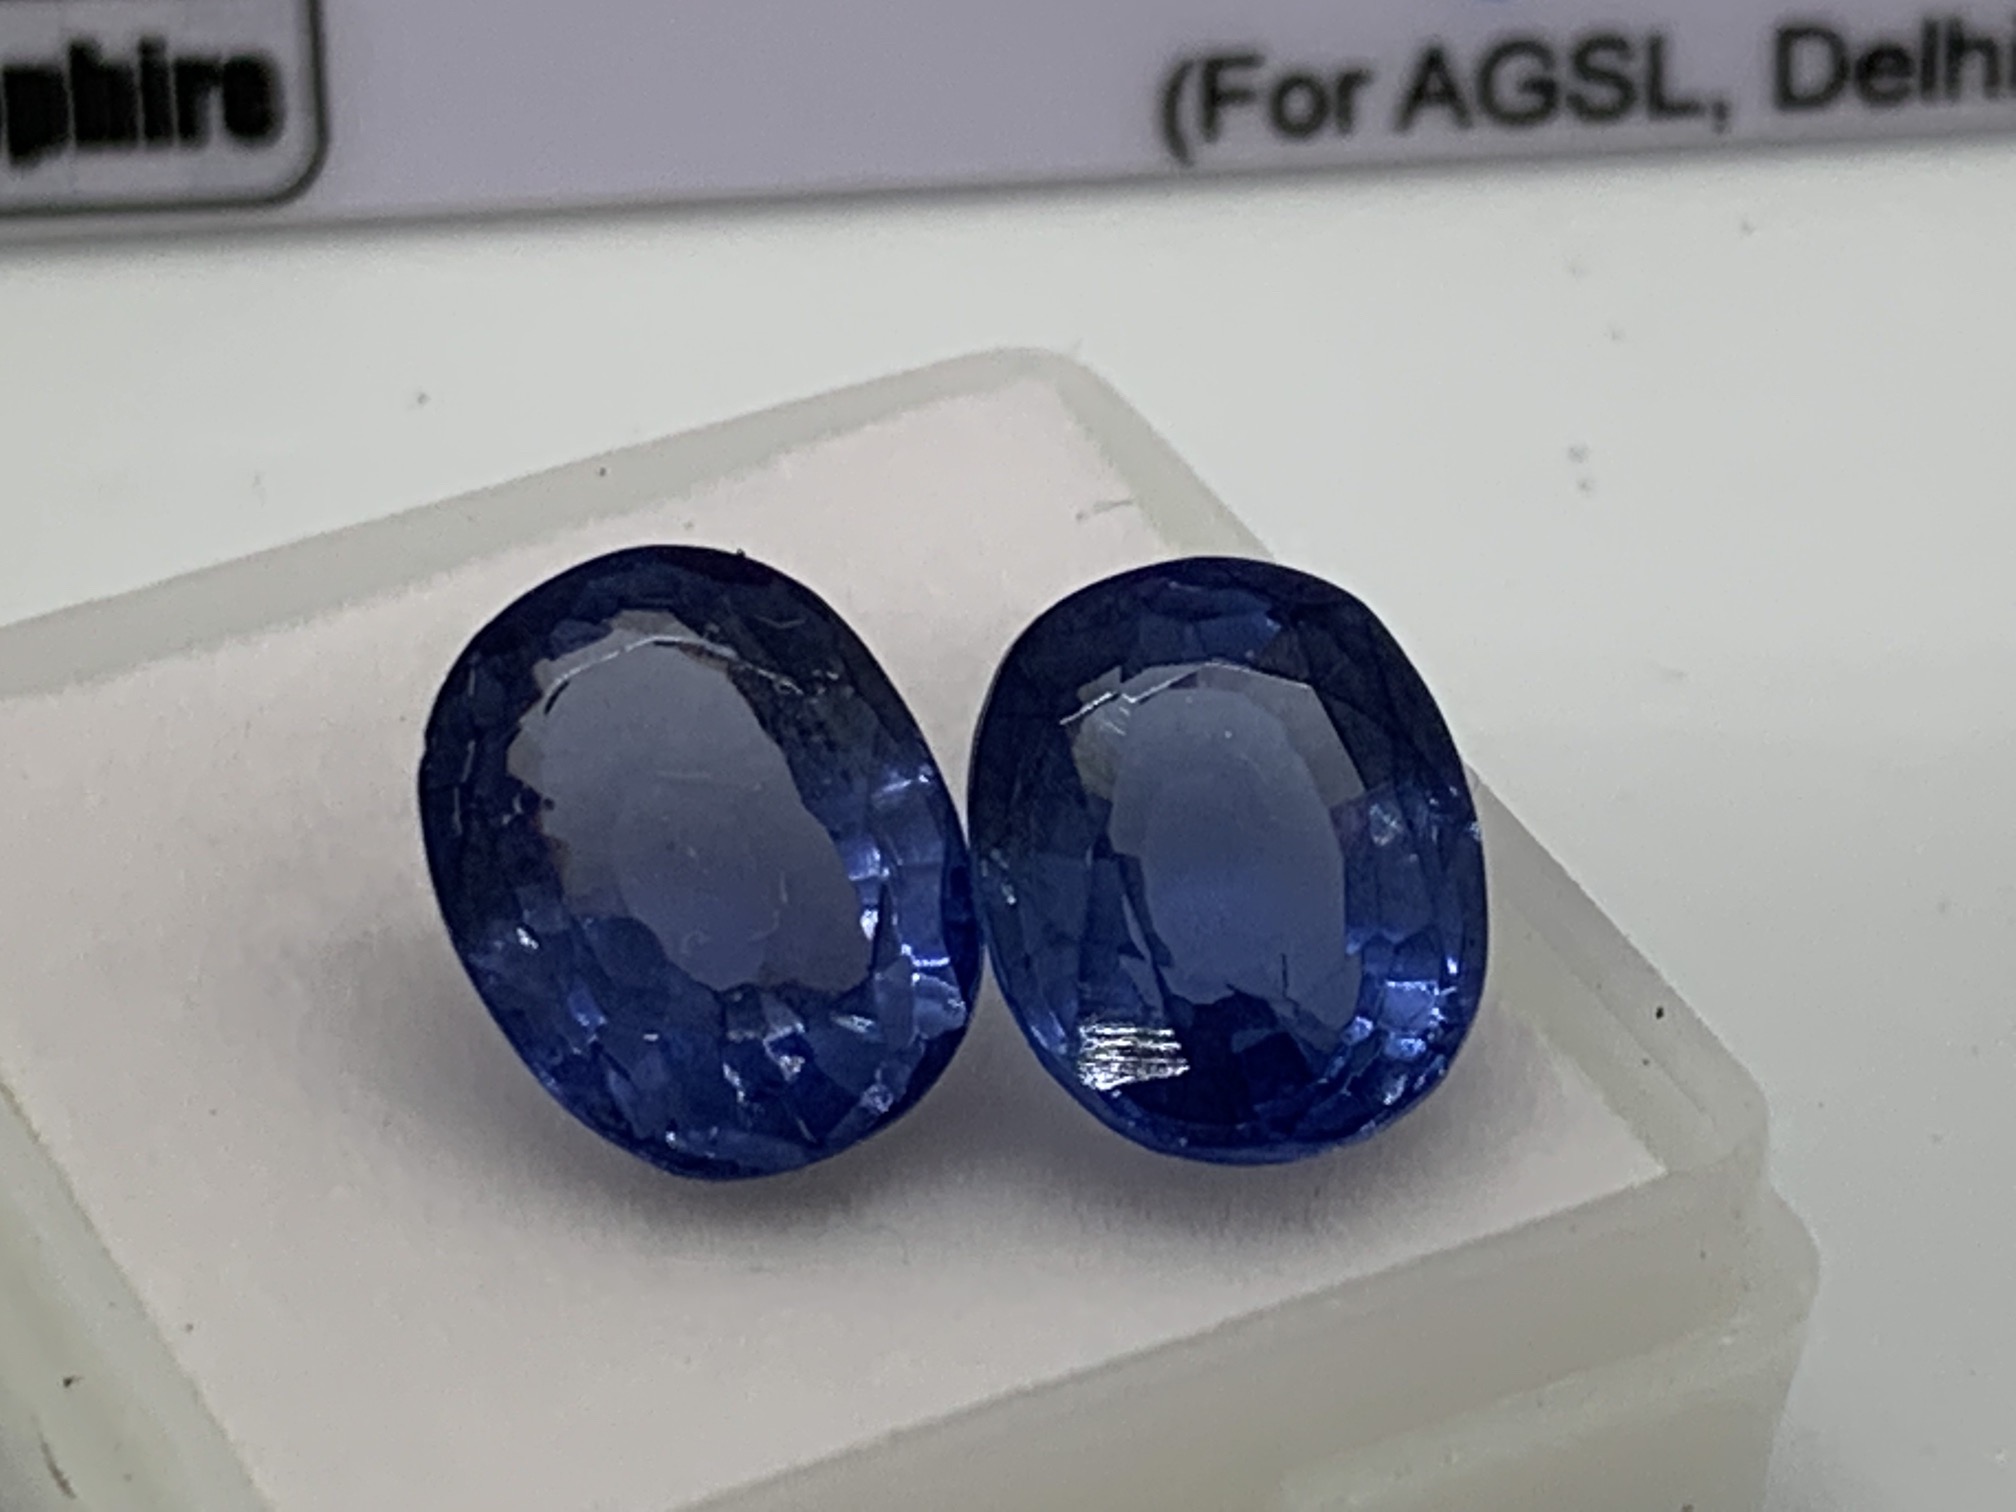 2 X BLUE STONE WITH CARD MARKED SAPPHIRE